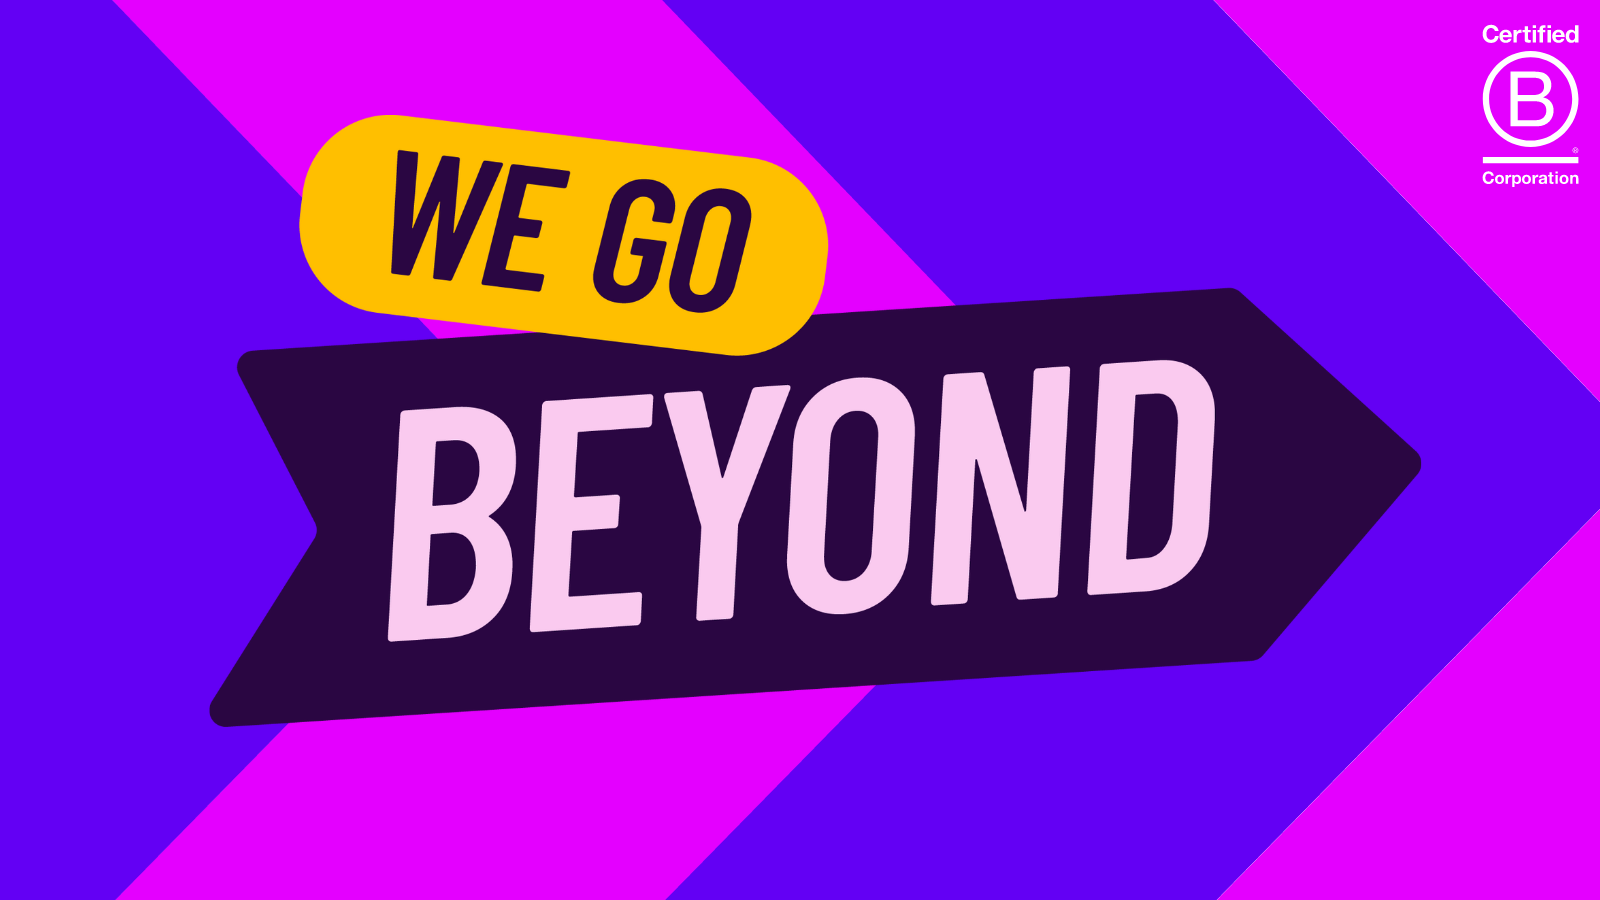 This year’s B Corp Month theme is #WeGoBeyond